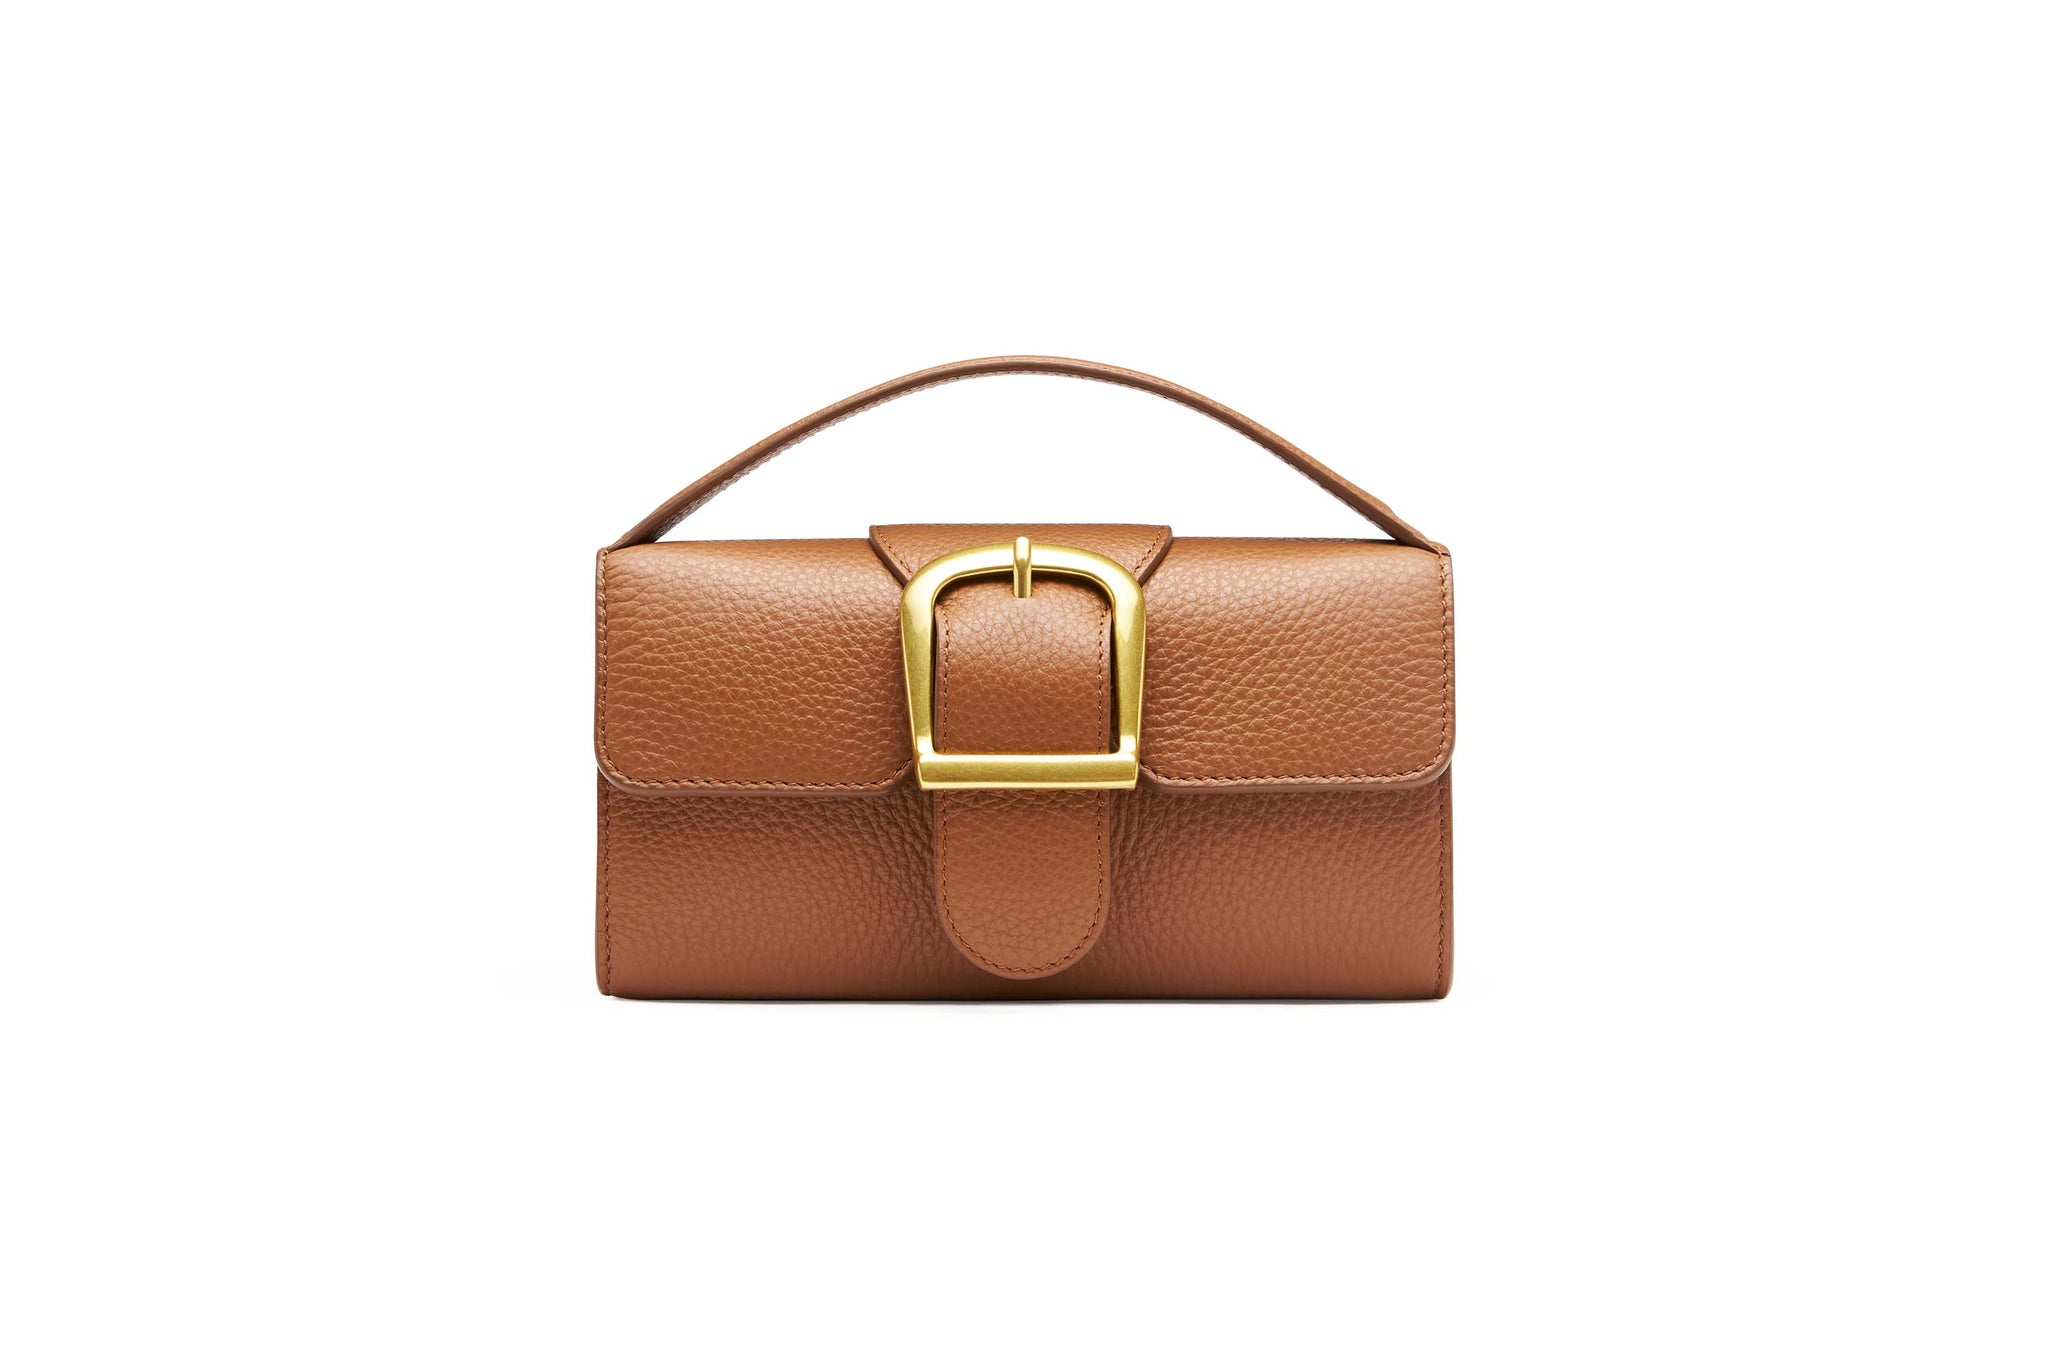 Rylan, Rylan Studio, Caramel Soft Grained Mini Satchel with Flat Handle, Made in Italy